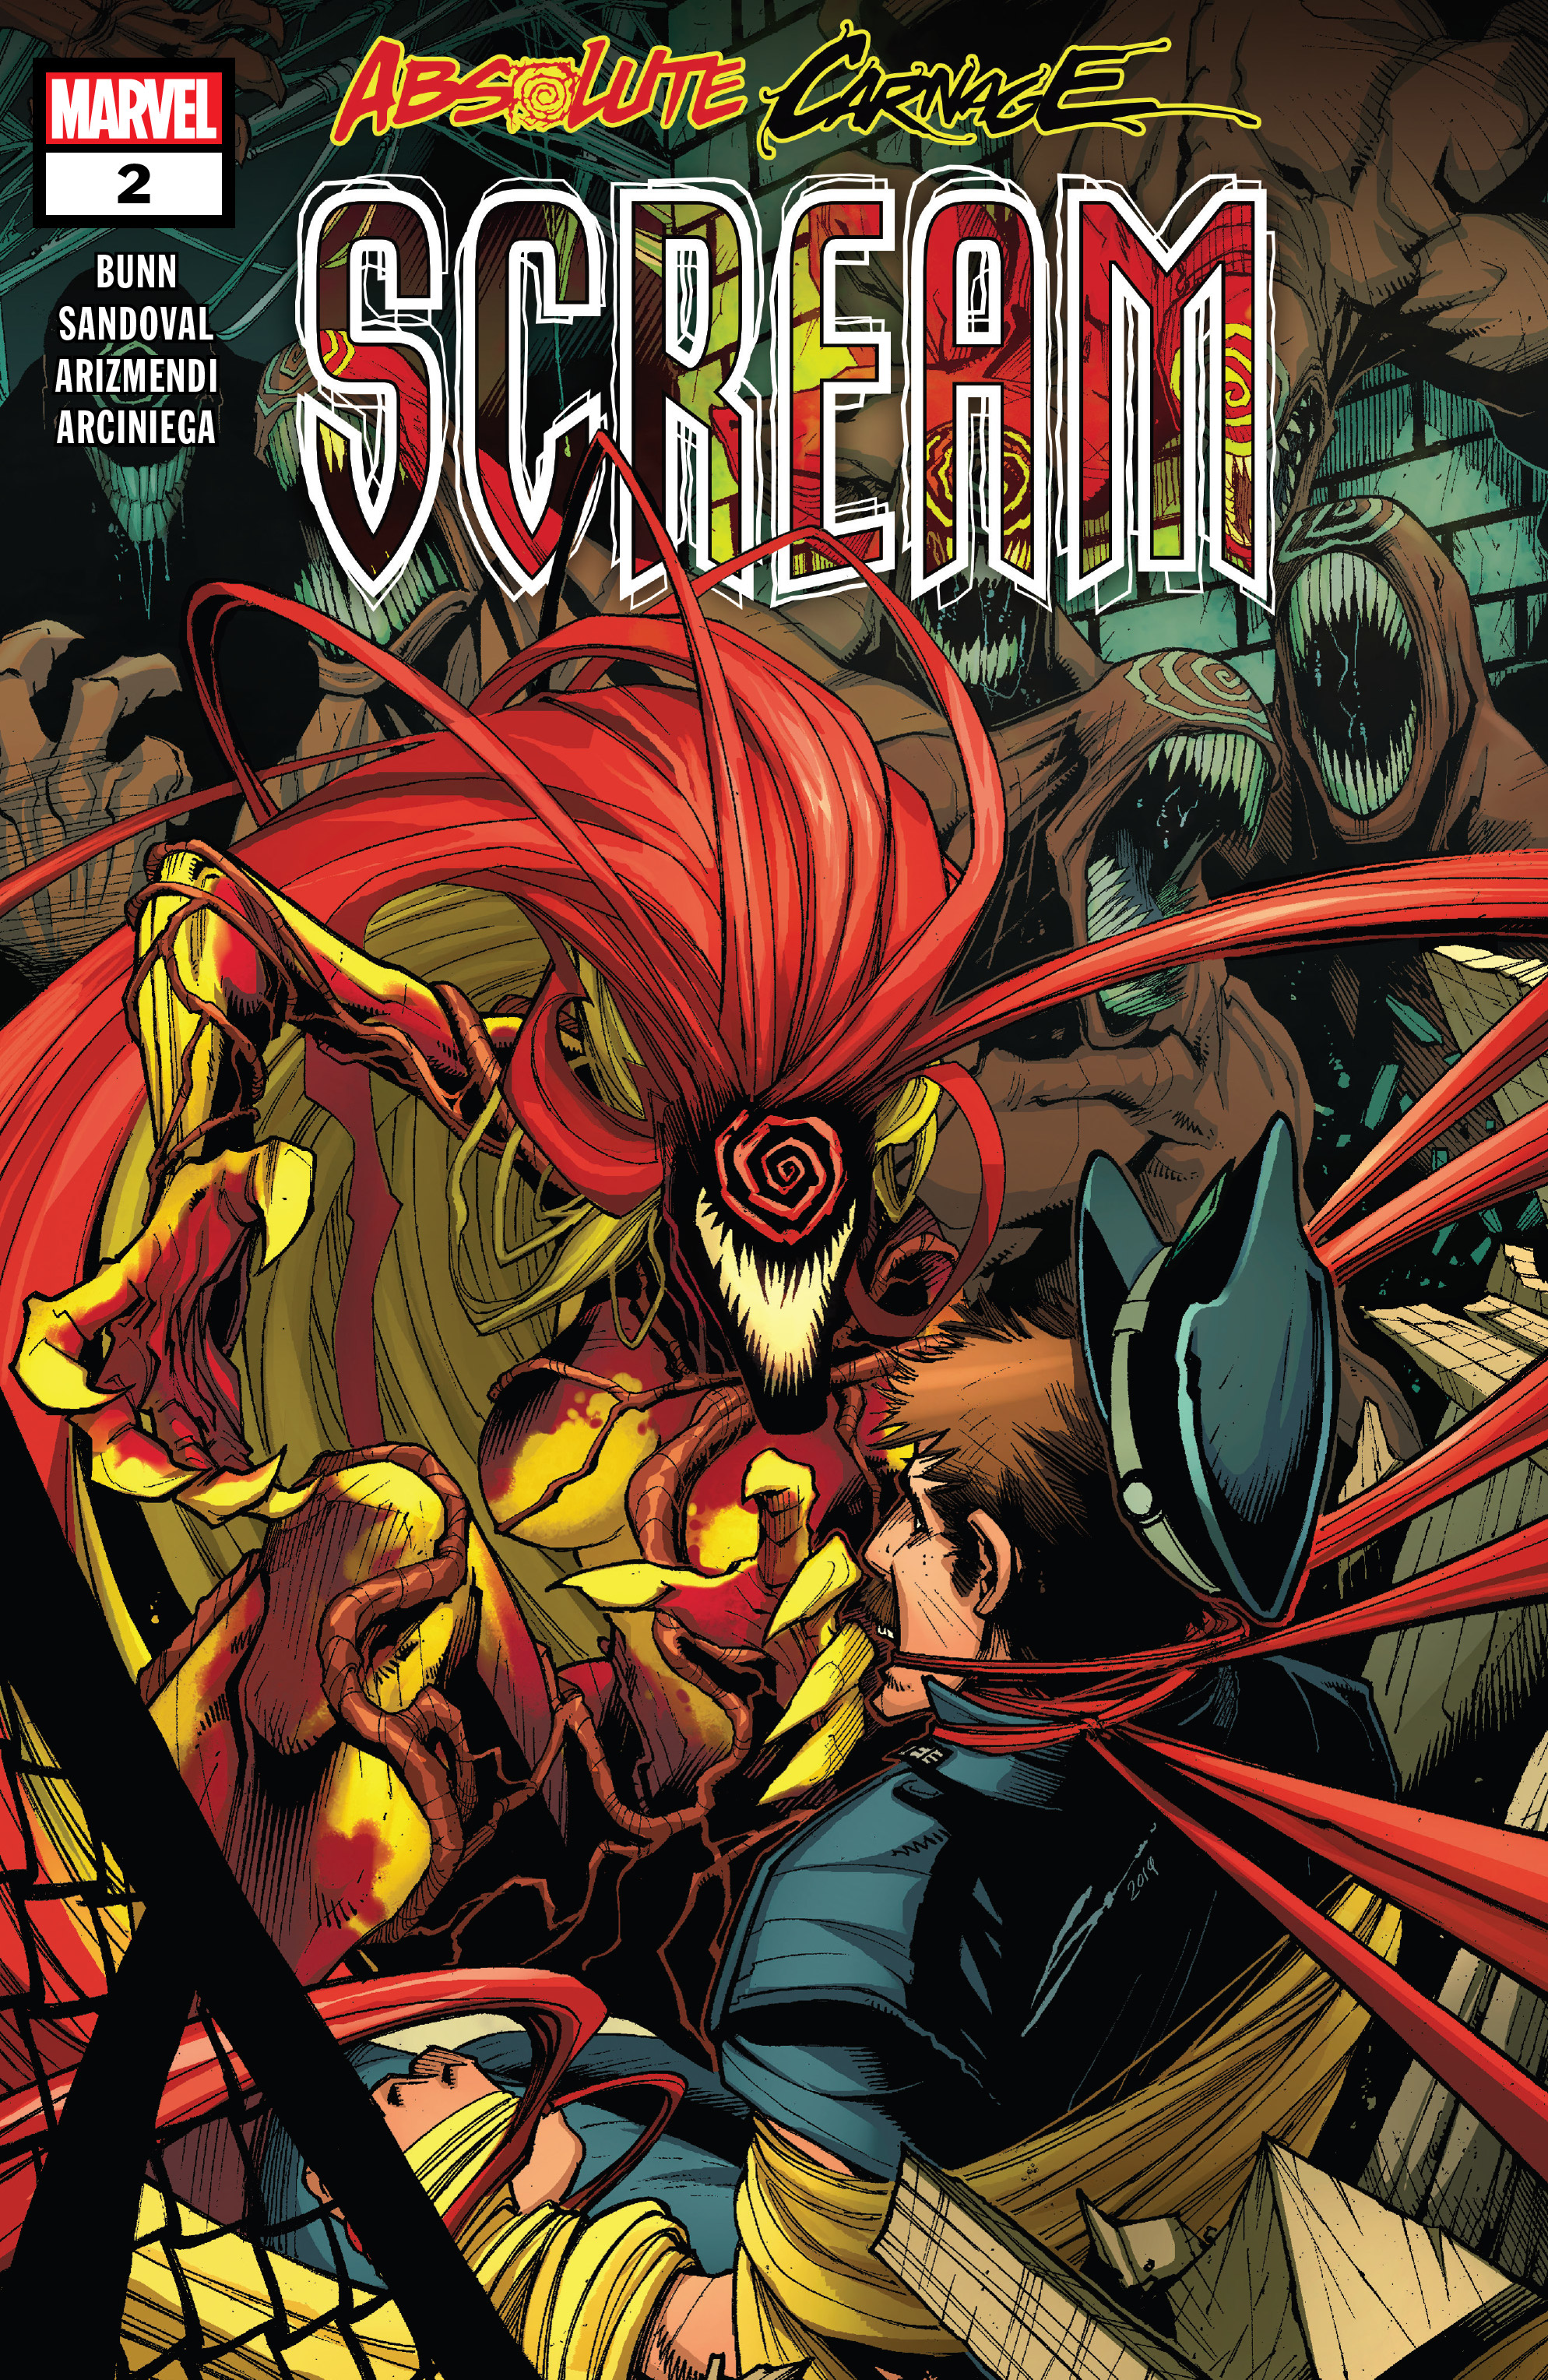 Read online Absolute Carnage: Scream comic -  Issue #2 - 1